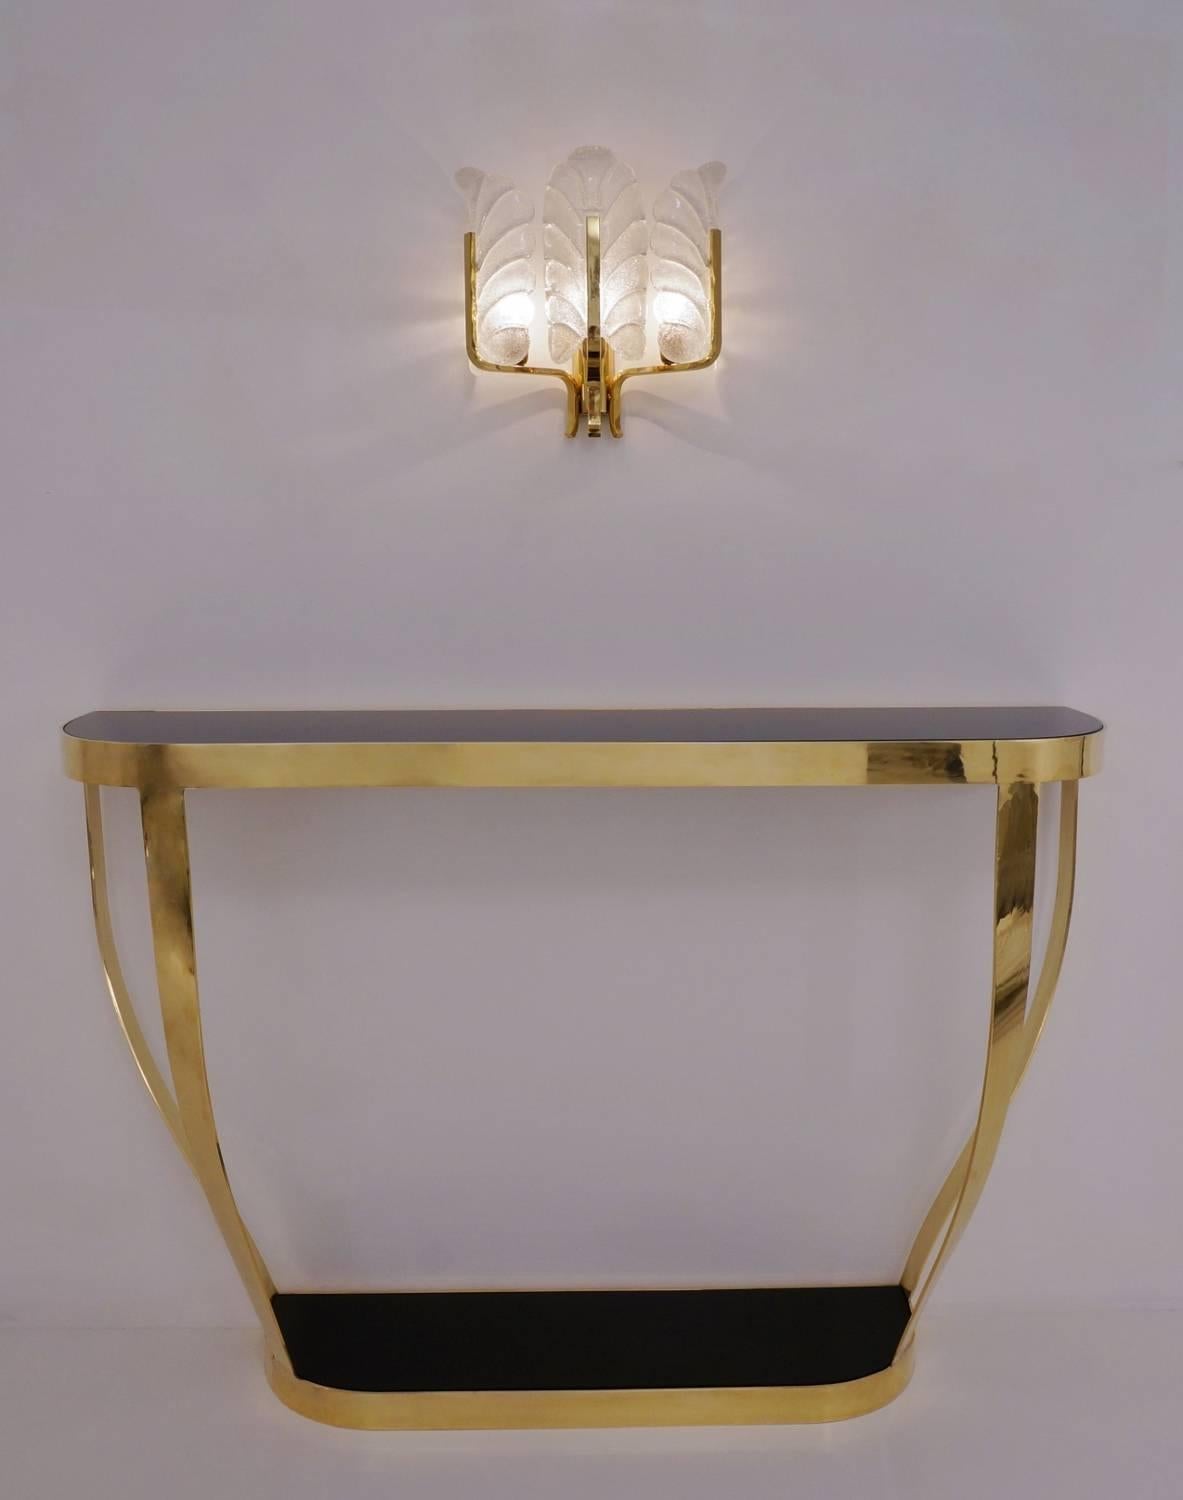 Pair of Console Tables, Solid Brass with Black Glass and Shelf, Italian 1